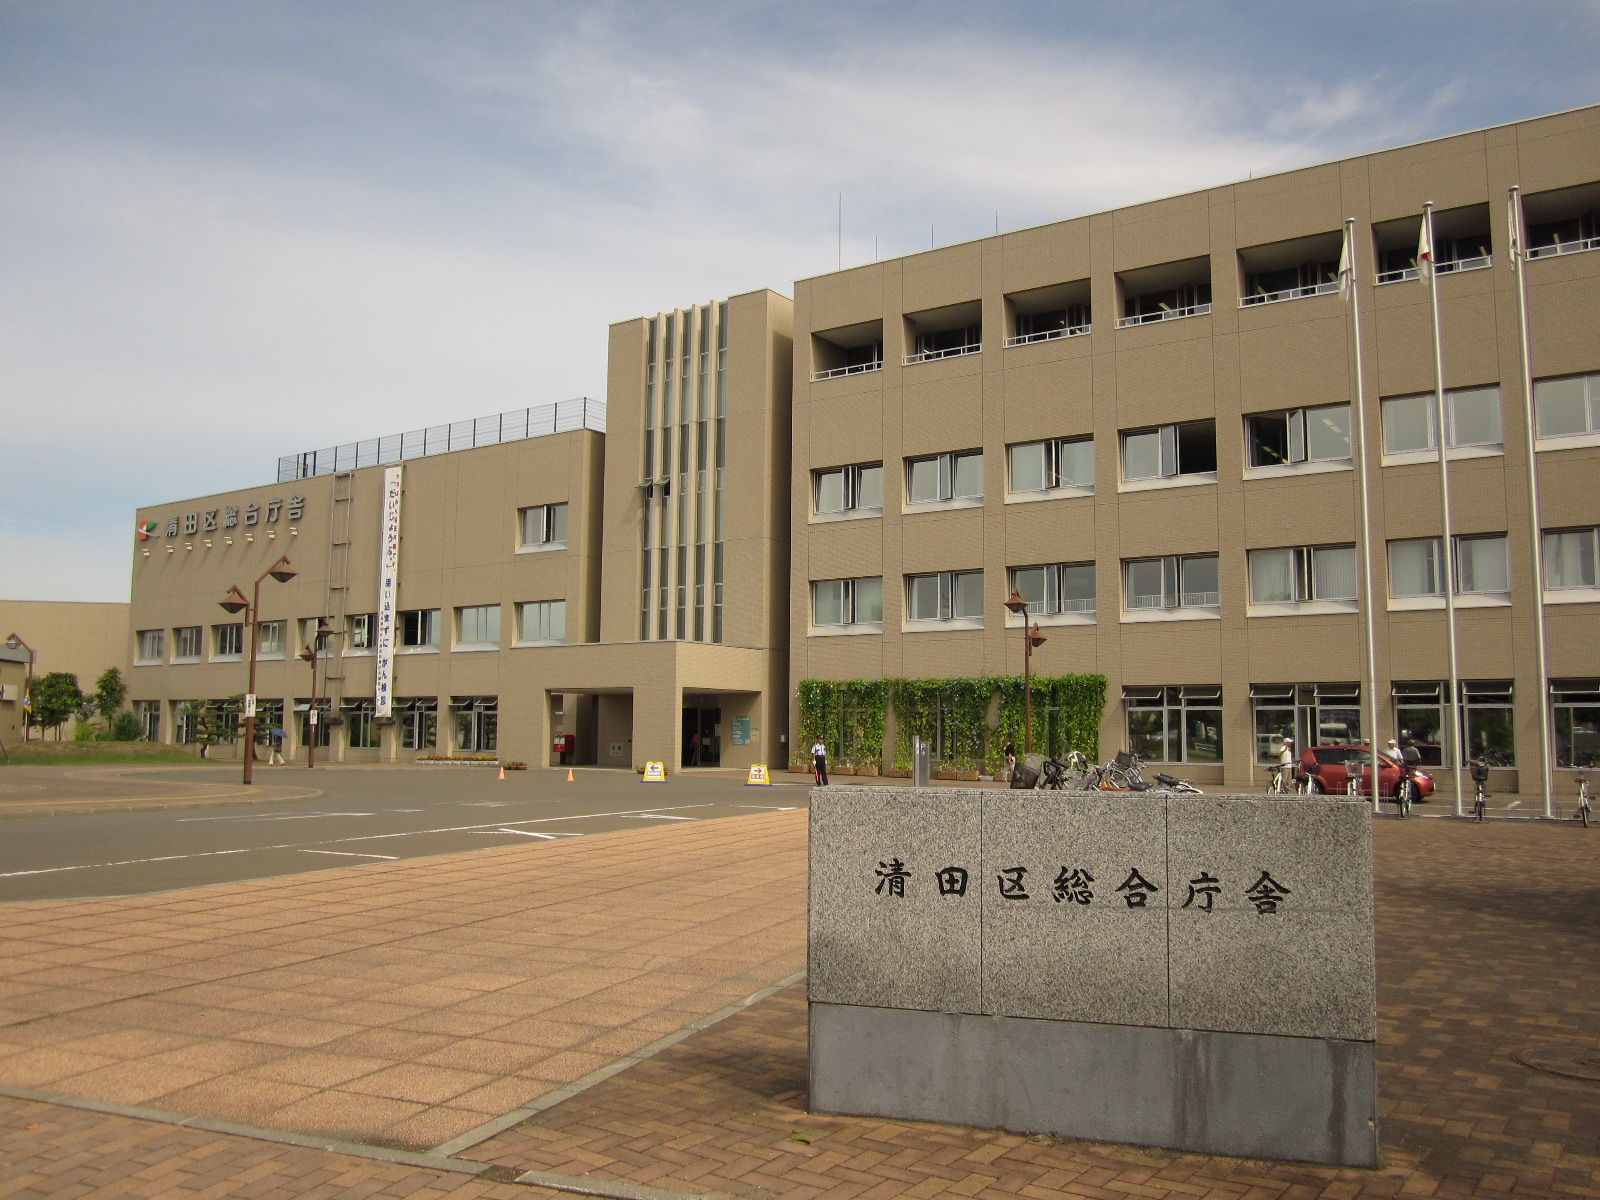 Government office. 595m to Sapporo Kiyota Ward (government office)